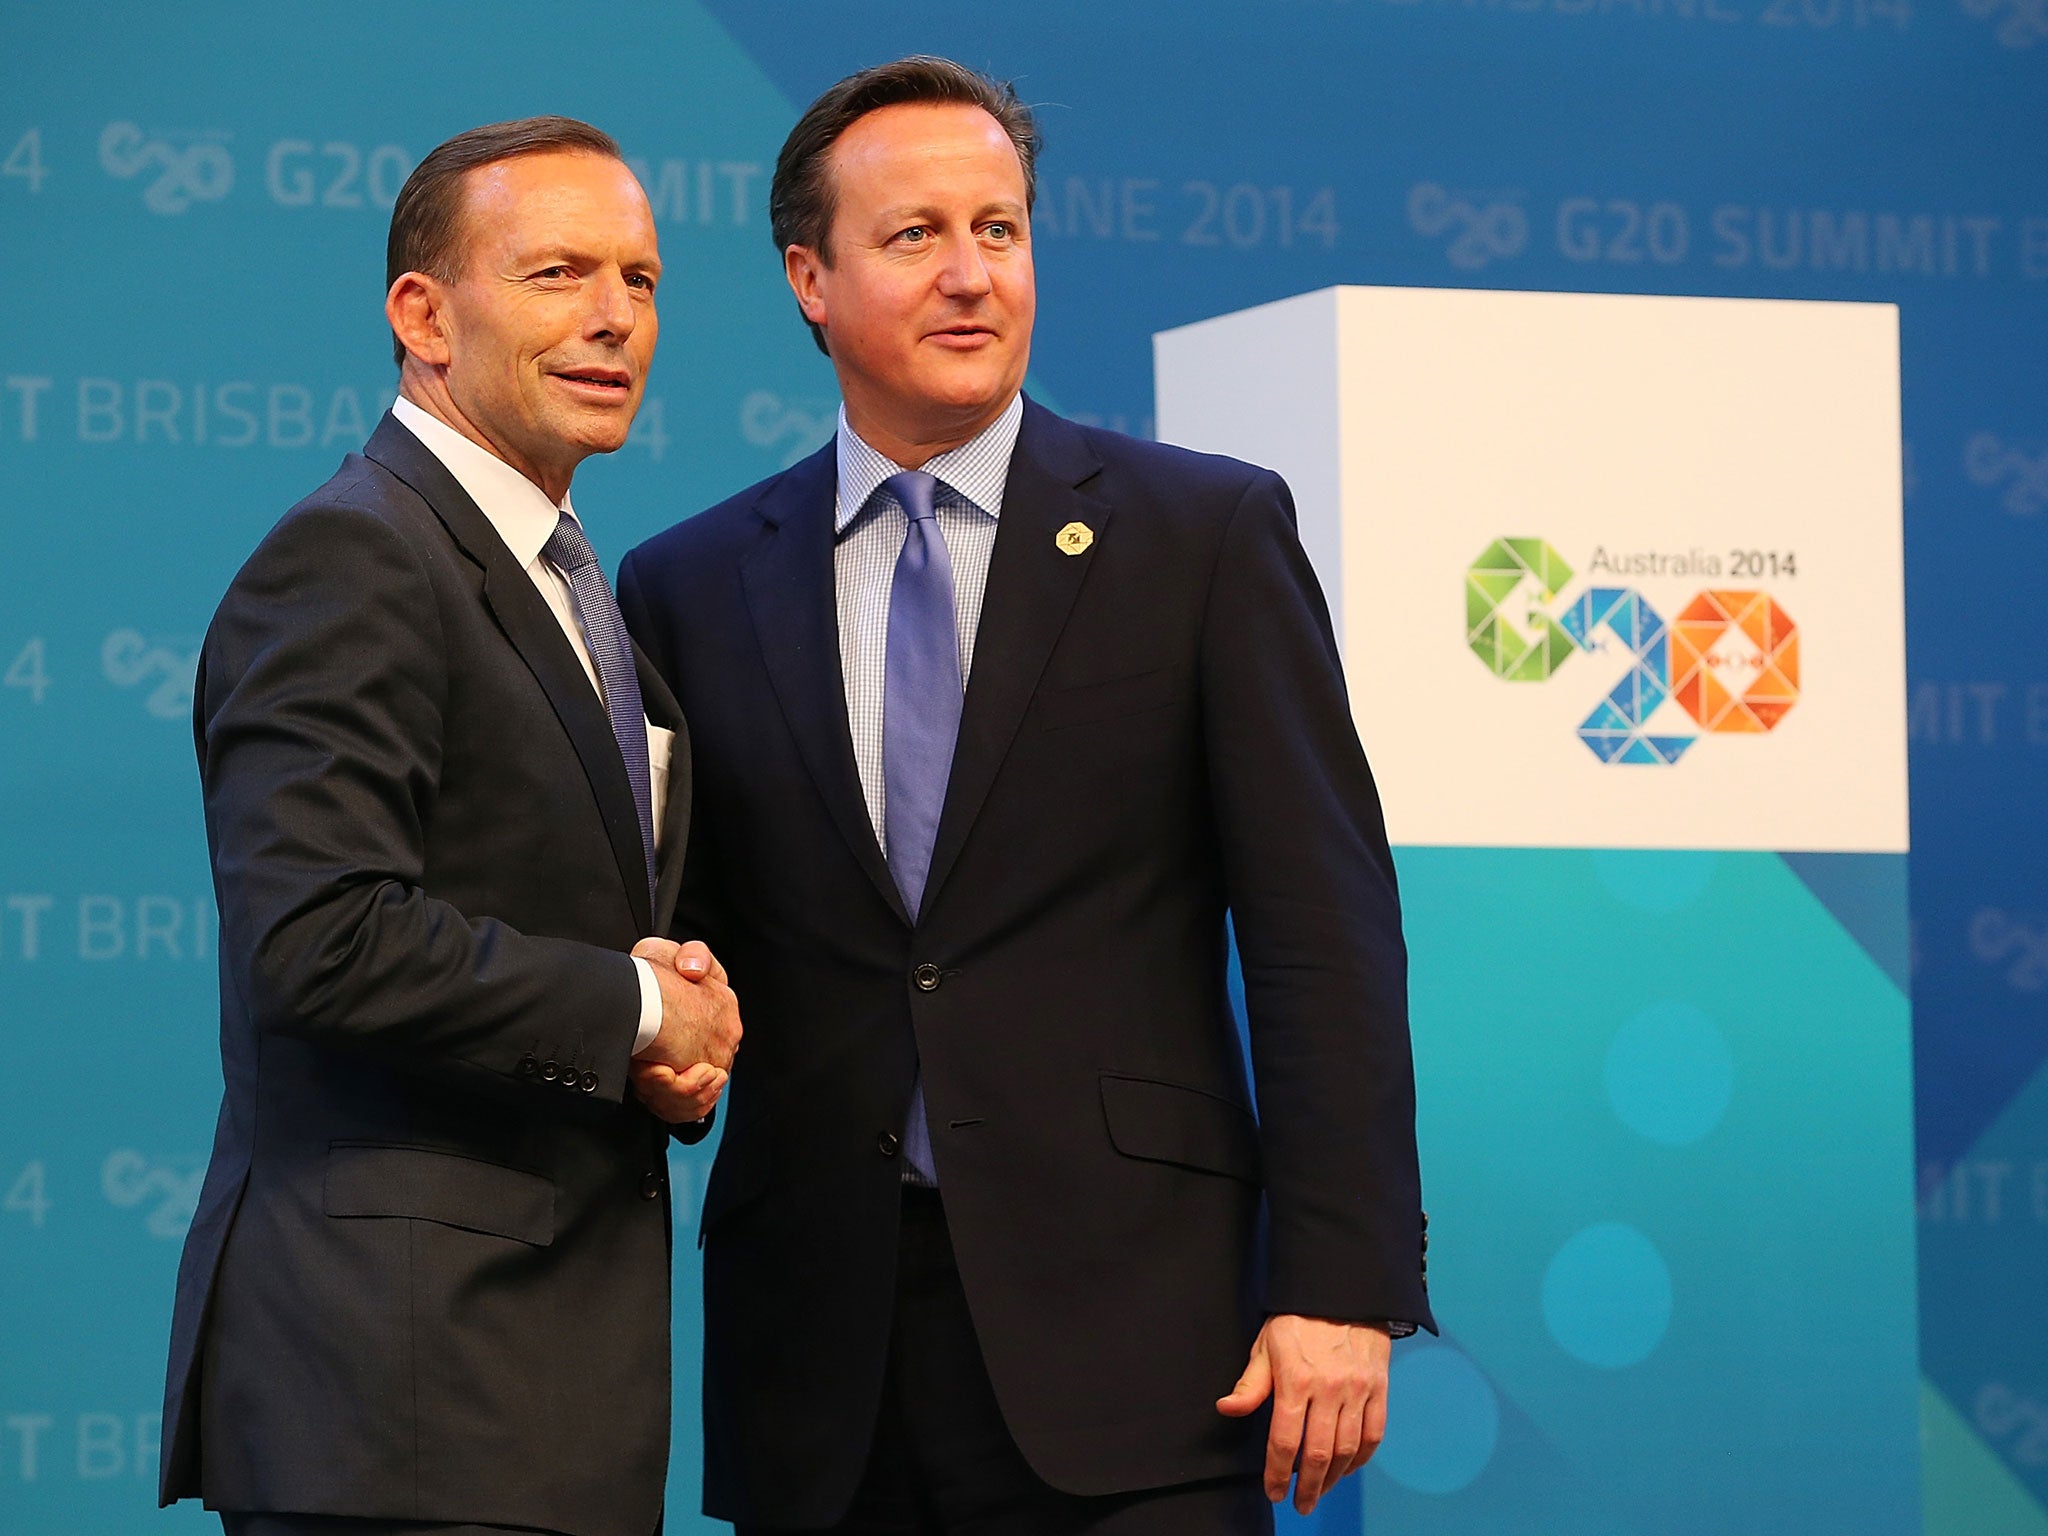 Mr Cameron has demanded that other members of the G20 put more money into fighting Ebola